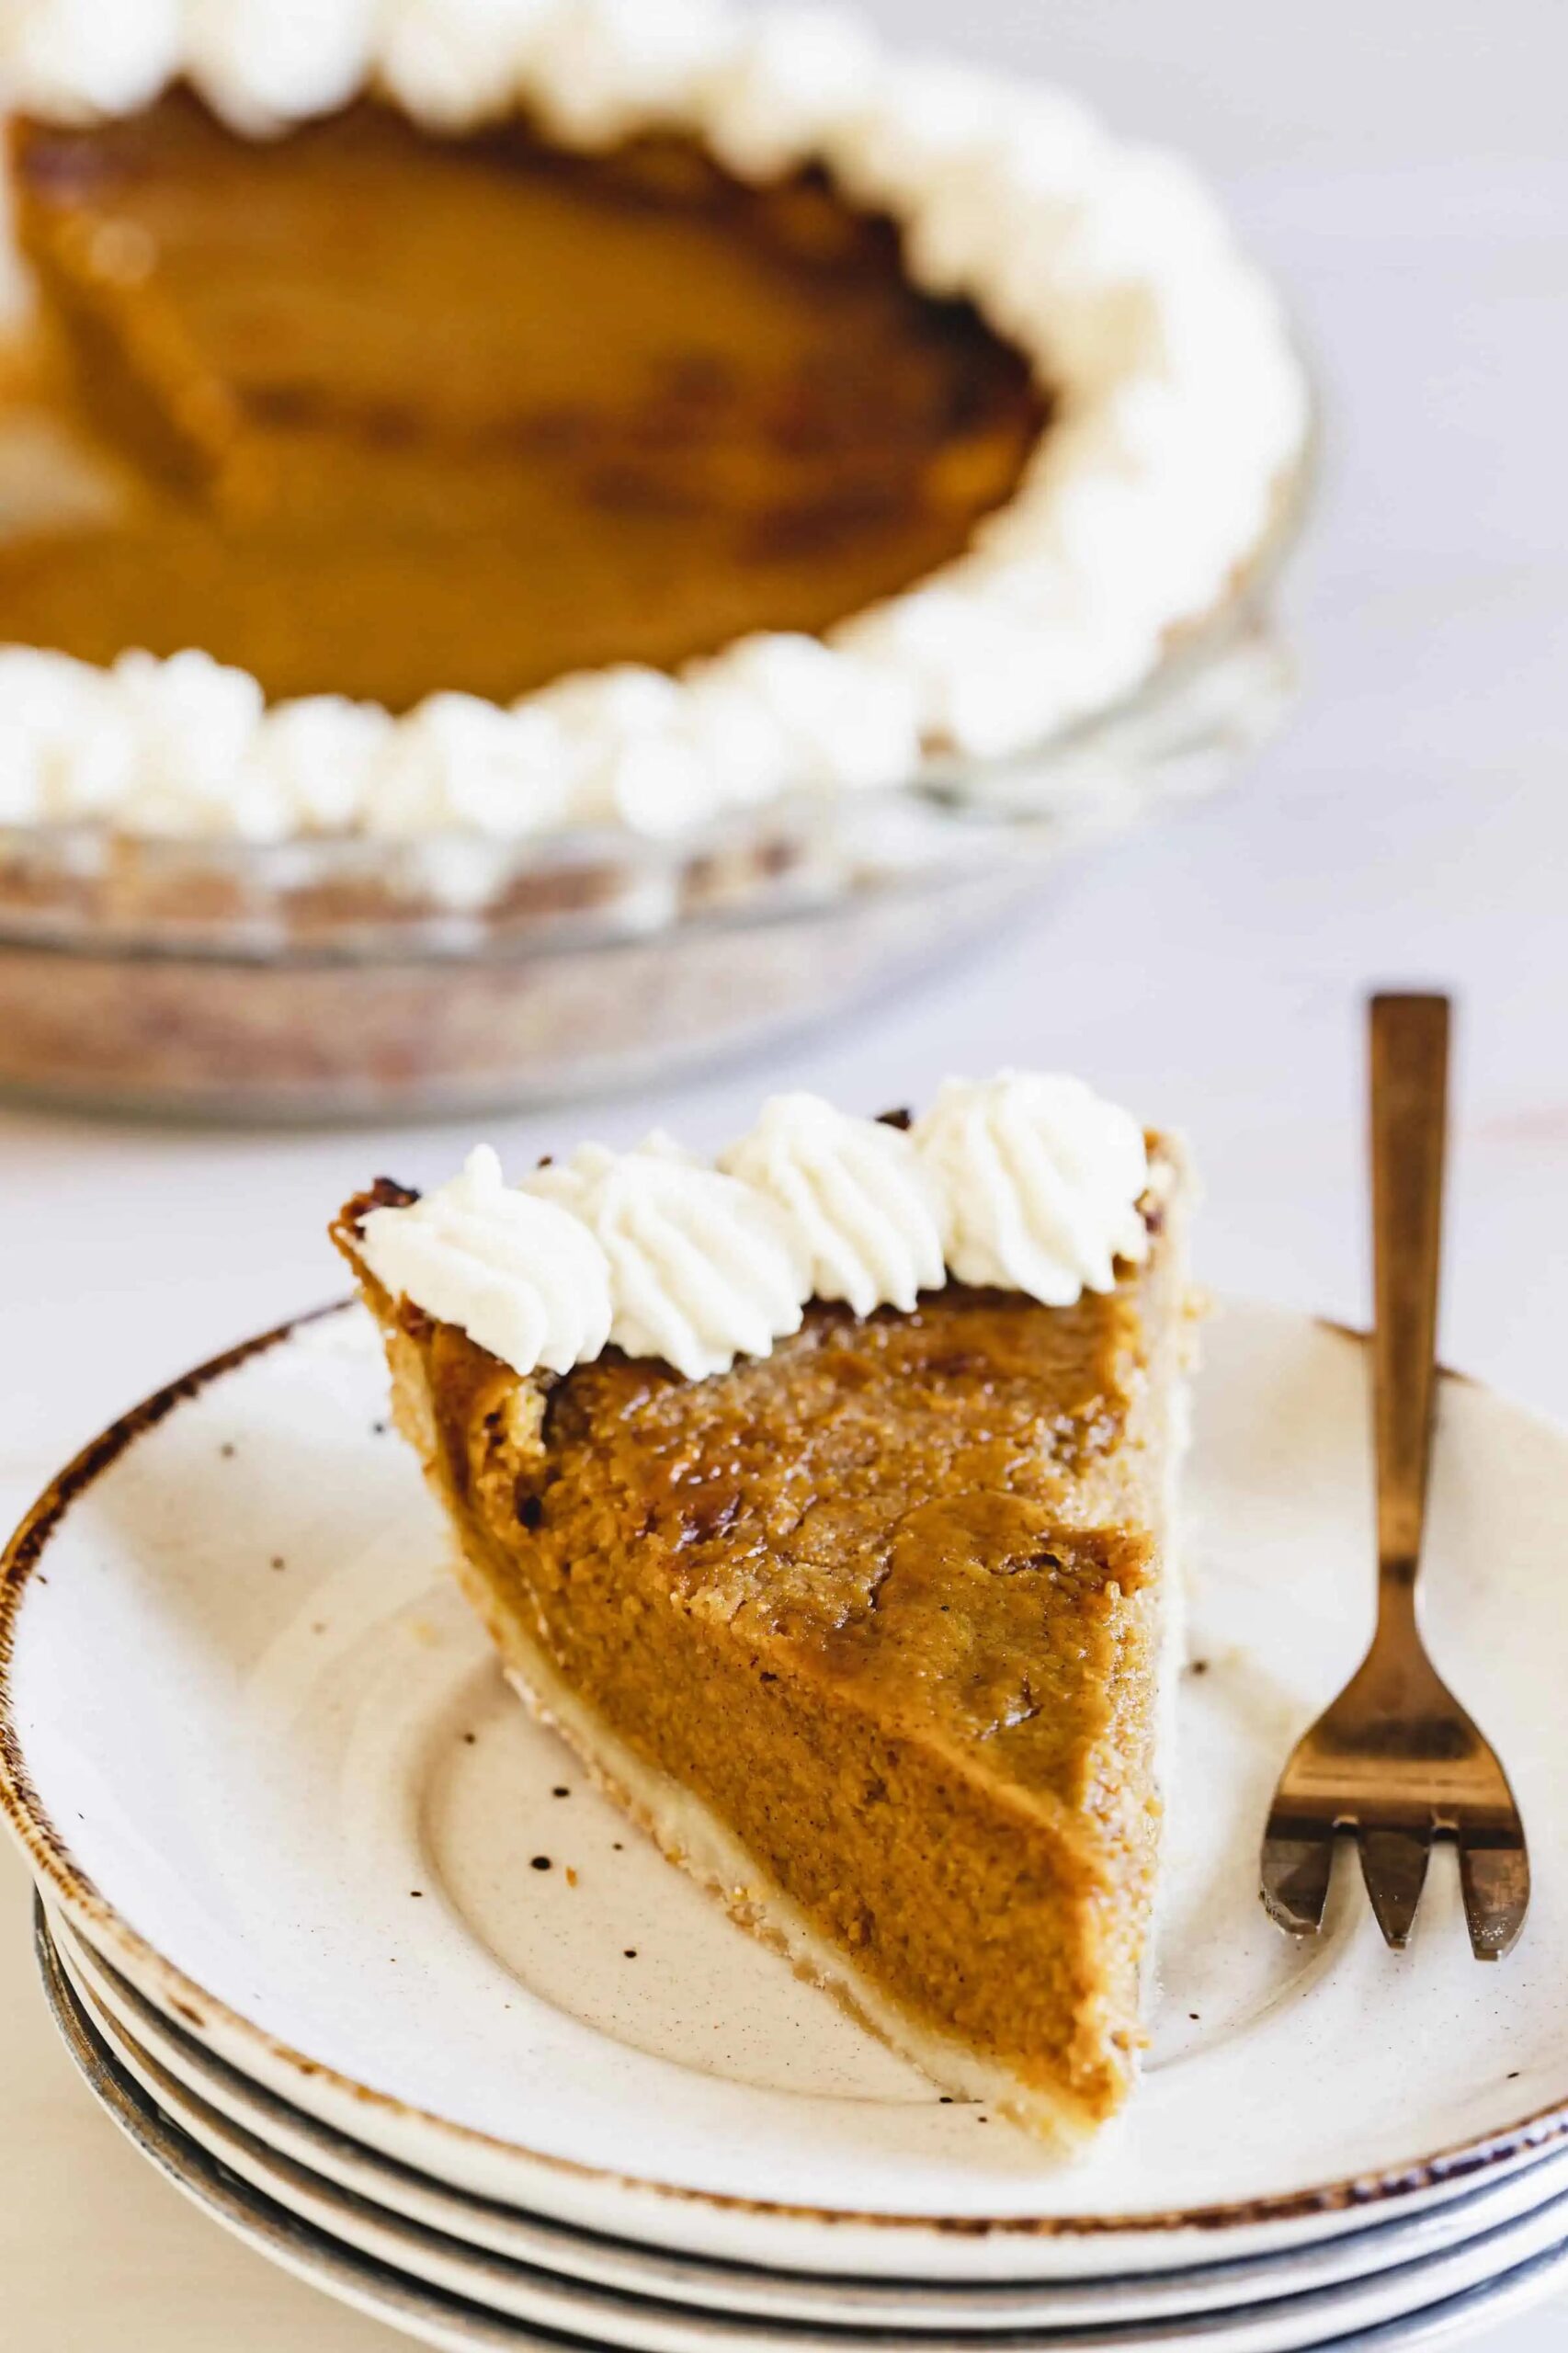  With this pumpkin pie, eating healthily never tasted so good.